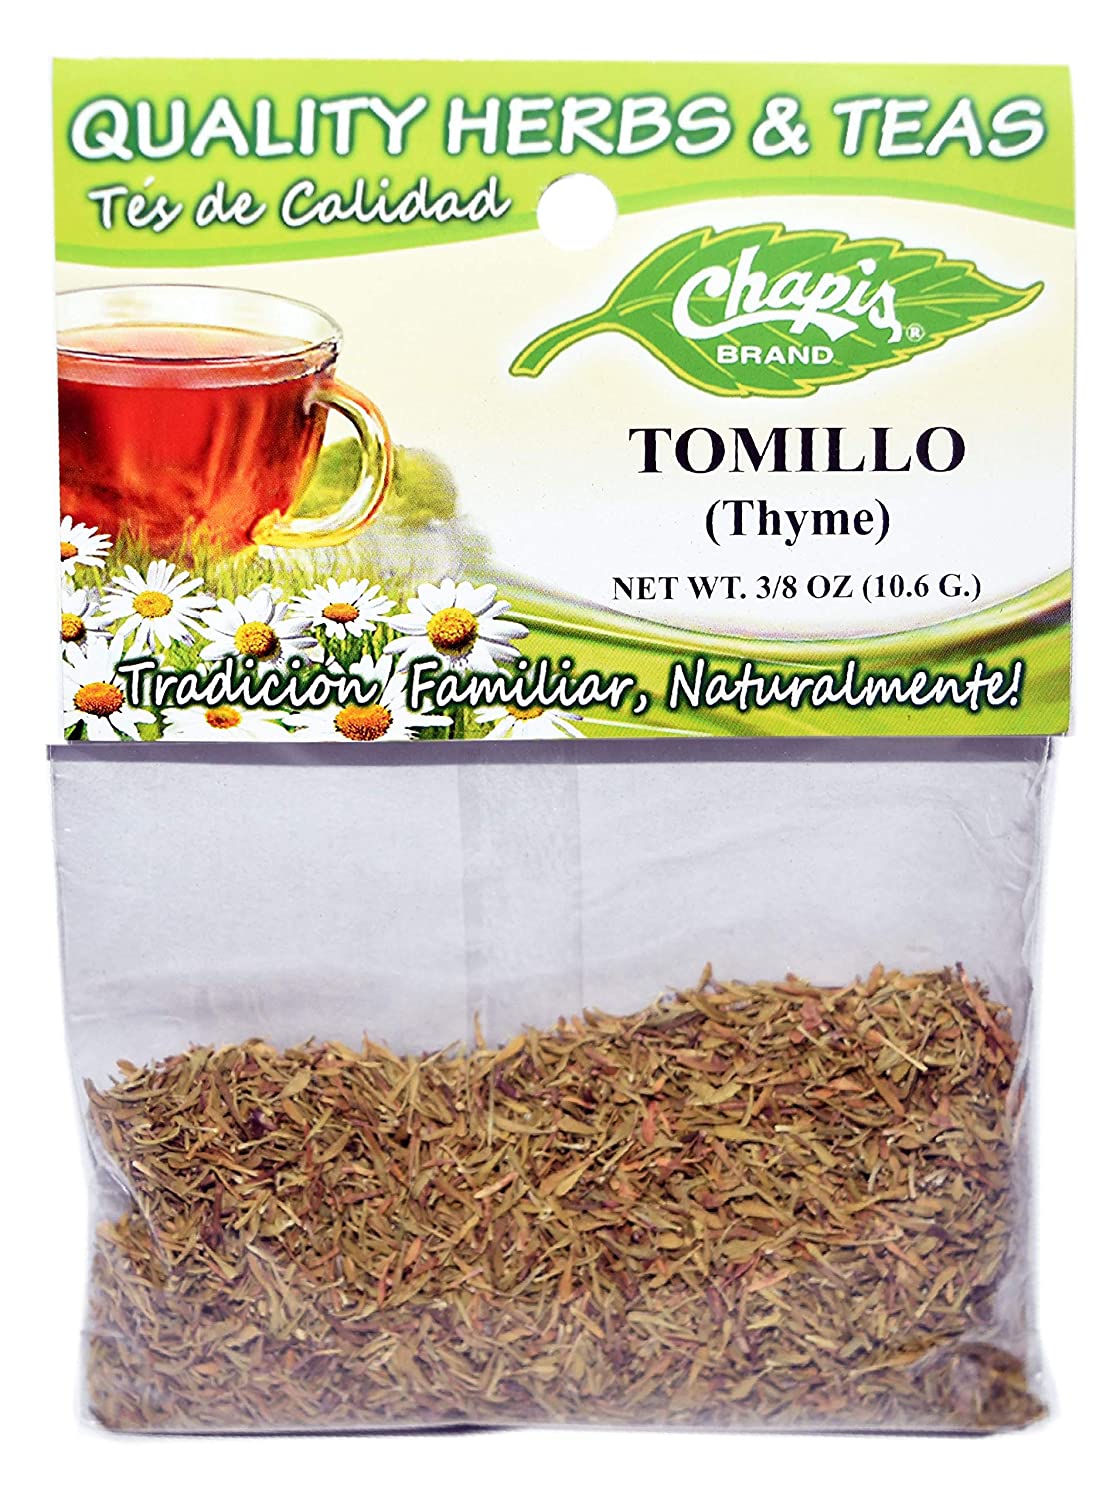 Chapis Tea/ Hierba Tomillo- Thyme Dried Natural Herbs Net Wt. 3/8 oz. (10.6 g) (3 Pack) - image 1 of 1